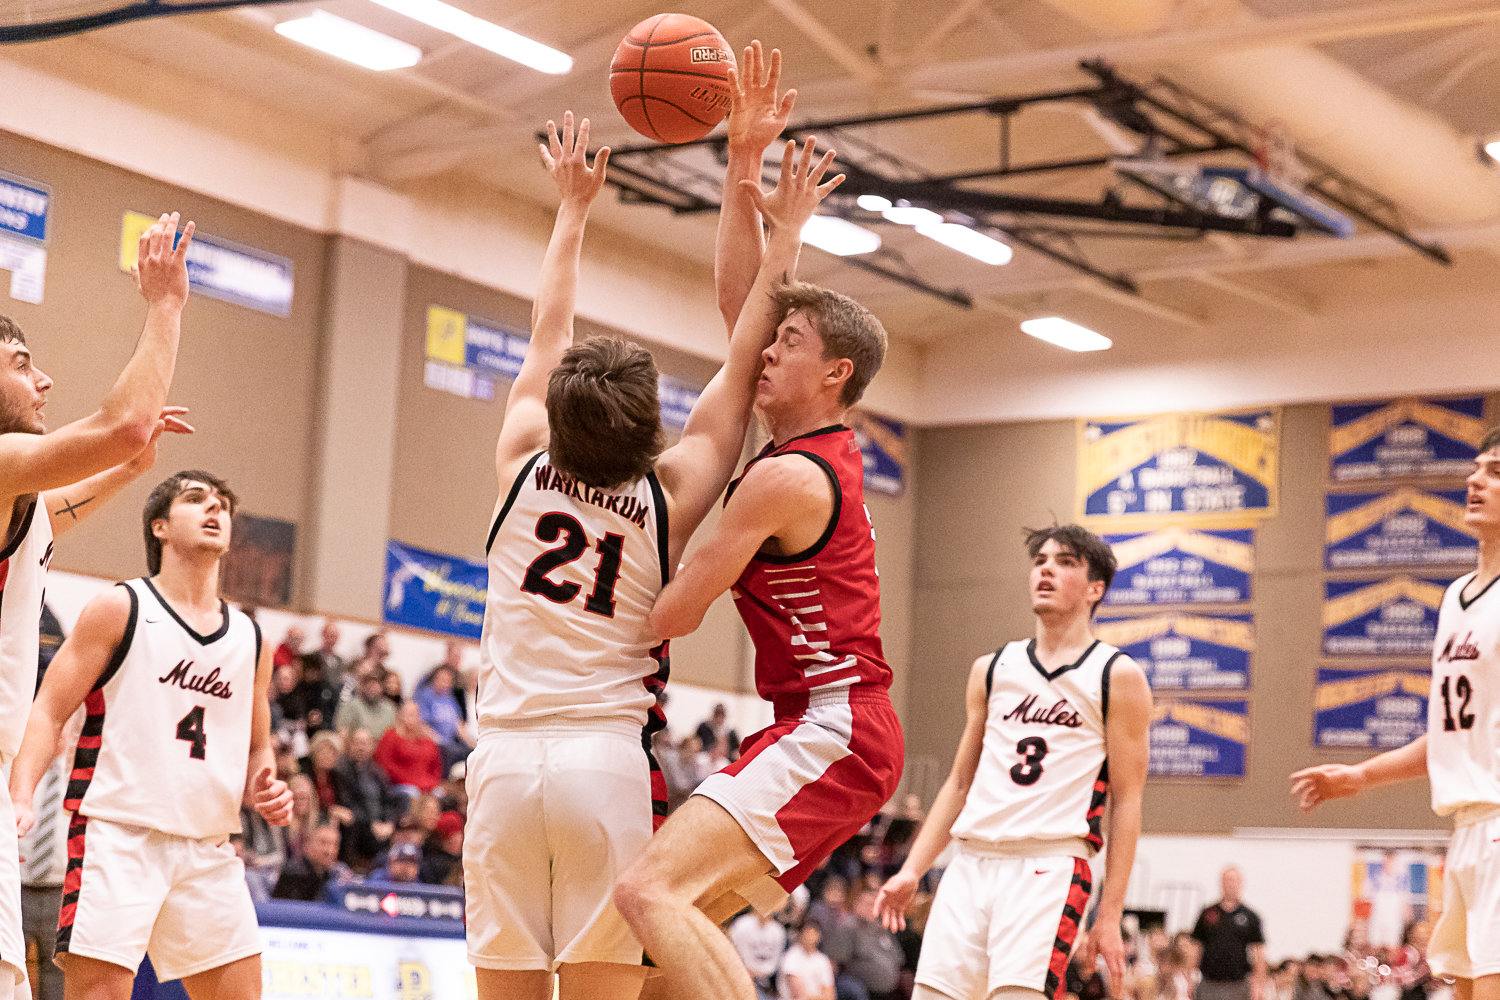 Toledo forward Conner Olmstead is fouled against Wahkiakum in the first round of the 2B District 4 tournament Feb. 4 at Rochester.